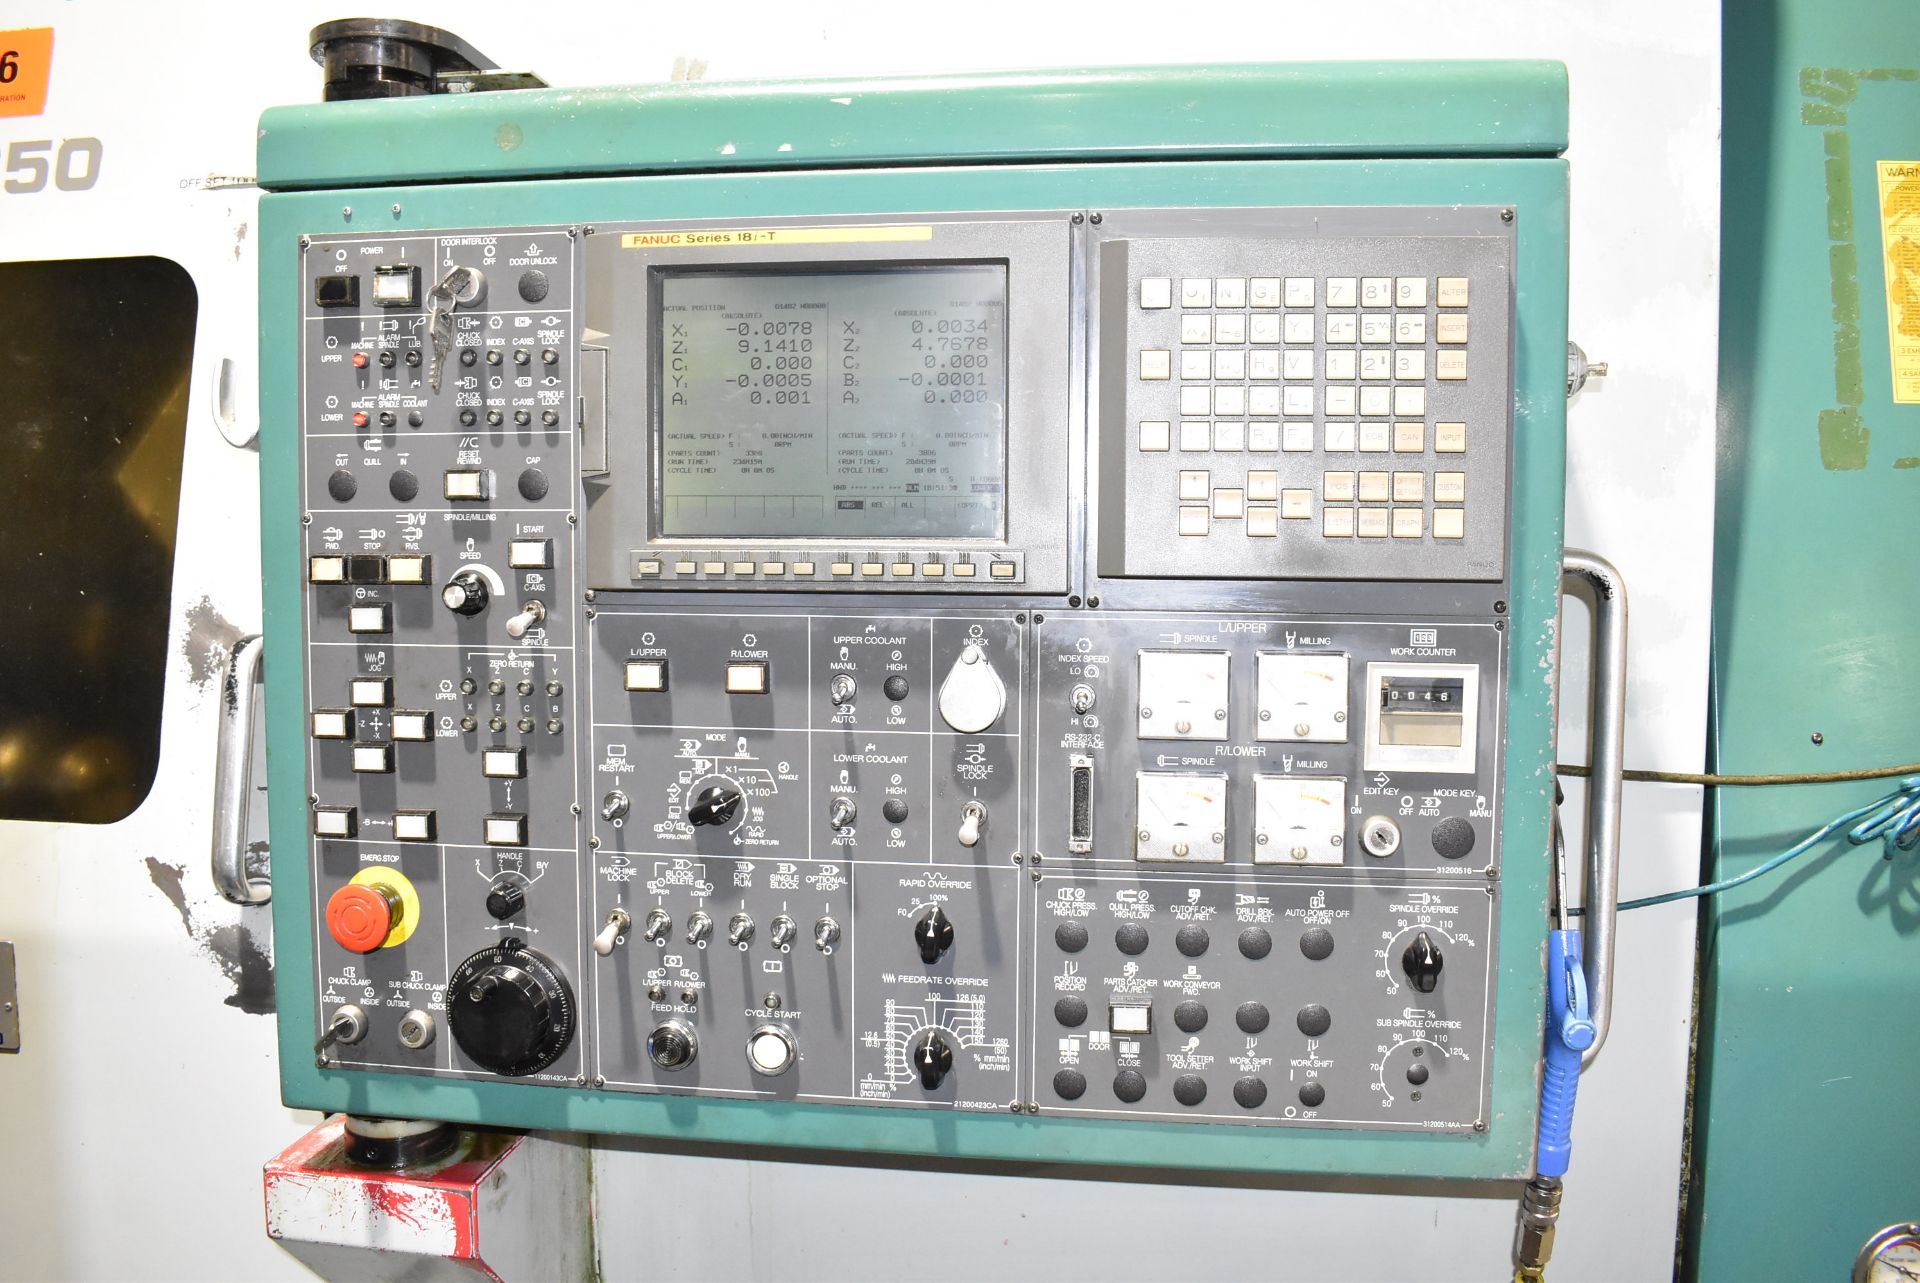 NAKAMURA-TOME WT-250 MULTI-AXIS OPPOSED SPINDLE AND TWIN TURRET CNC MULTI-TASKING CENTER WITH - Image 7 of 14